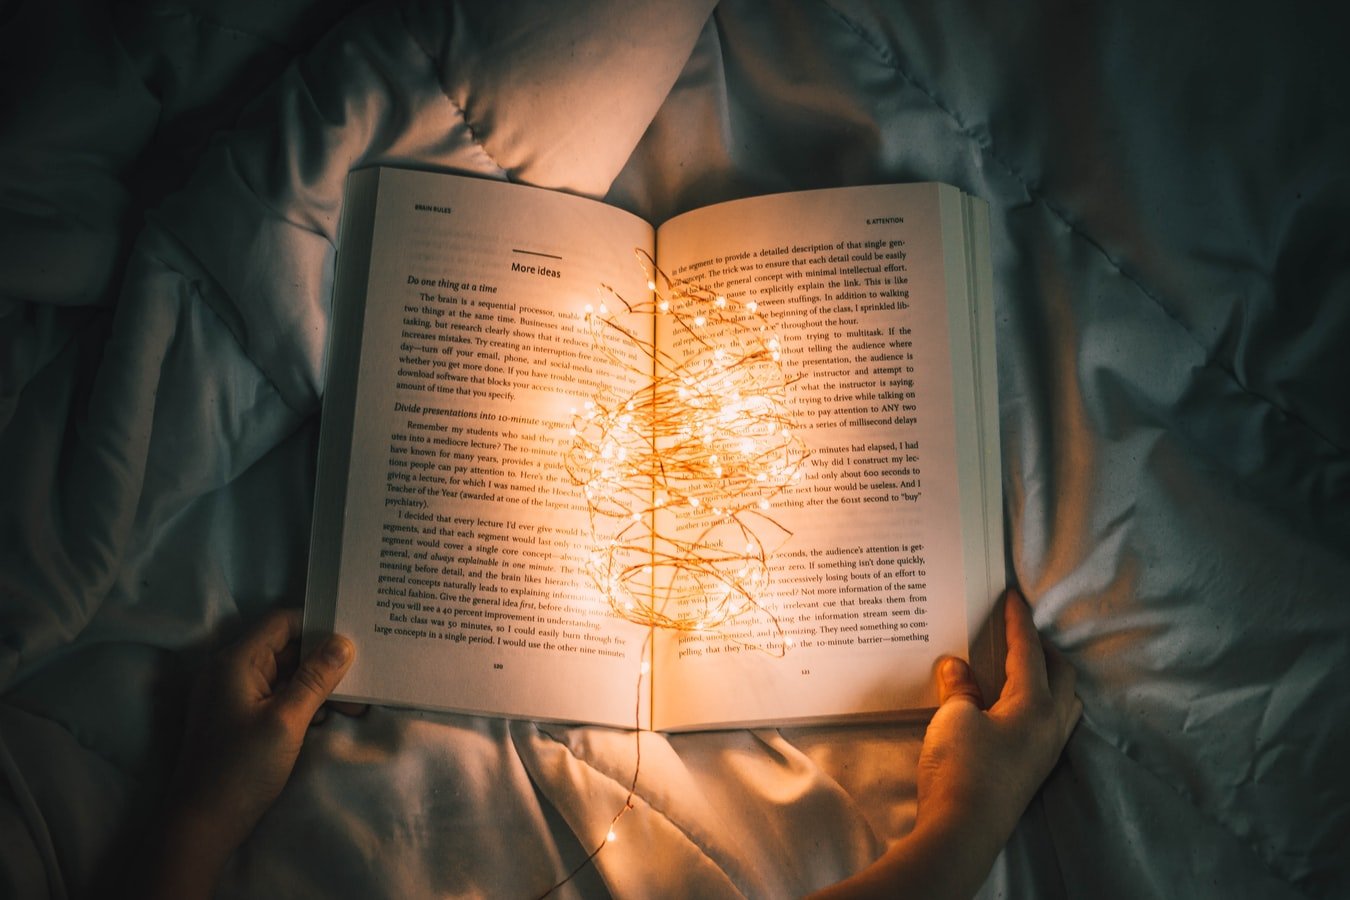 A book with lights